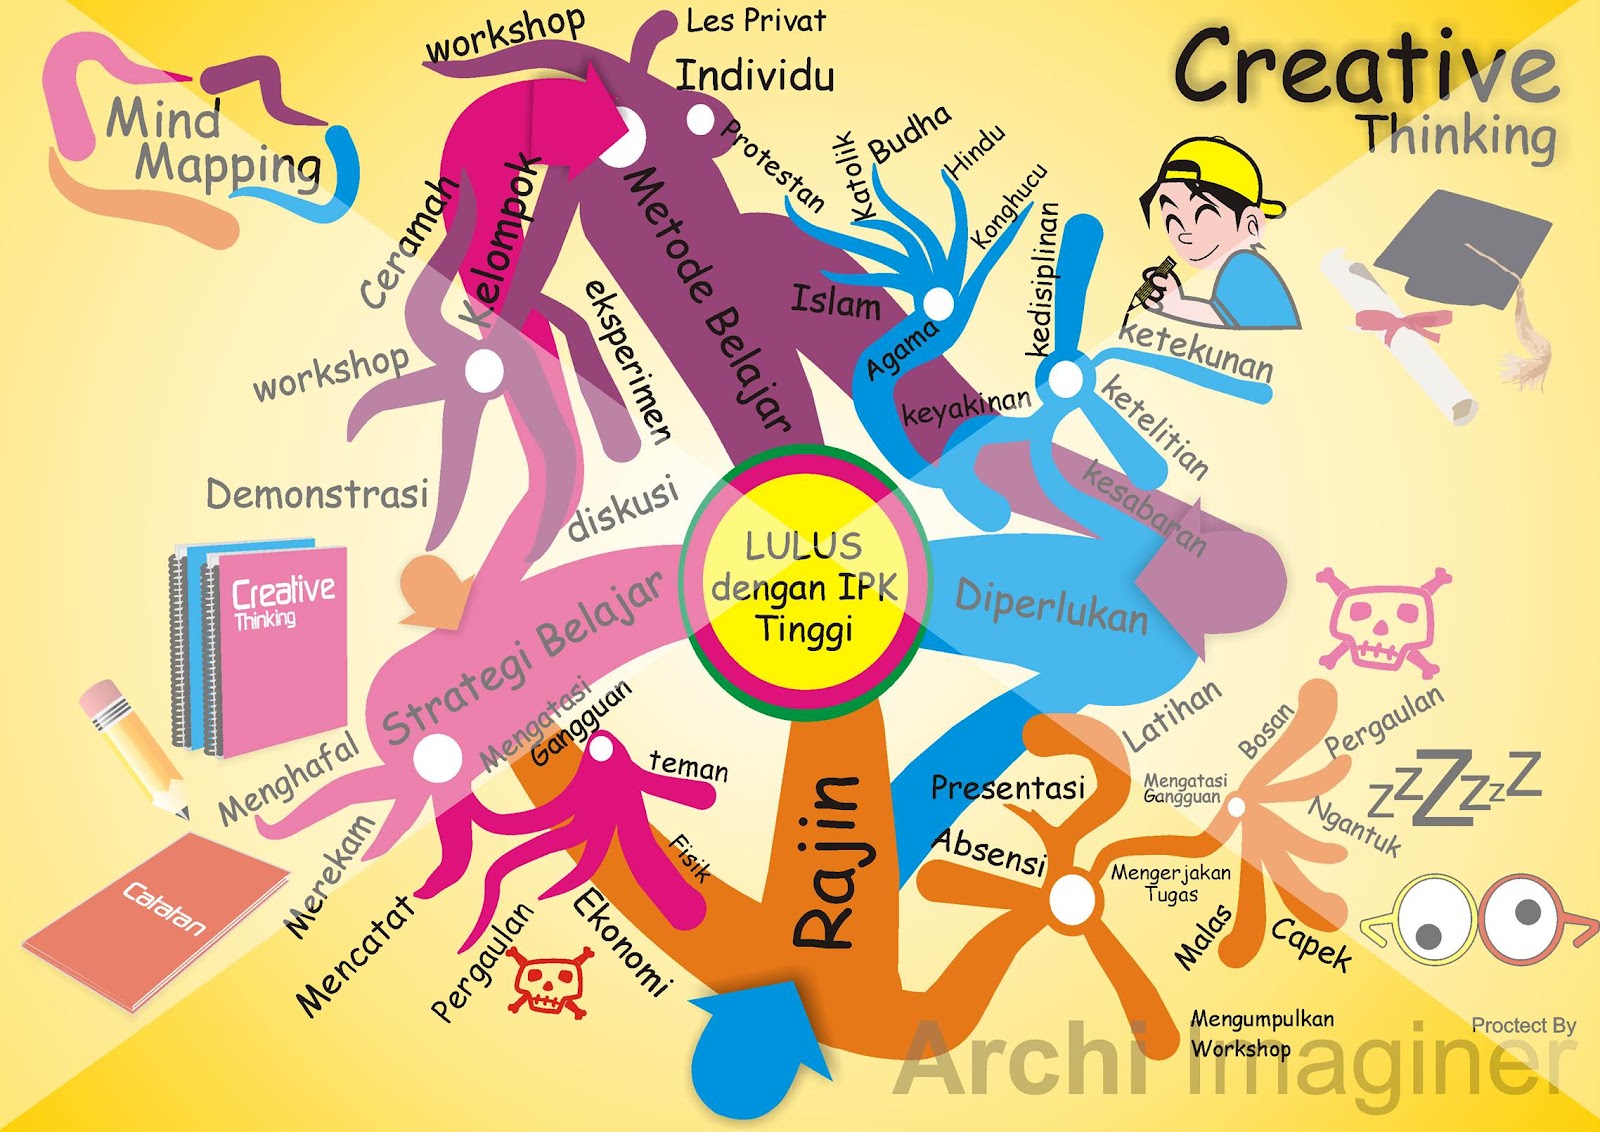 Archi Artwork: Mind Mapping